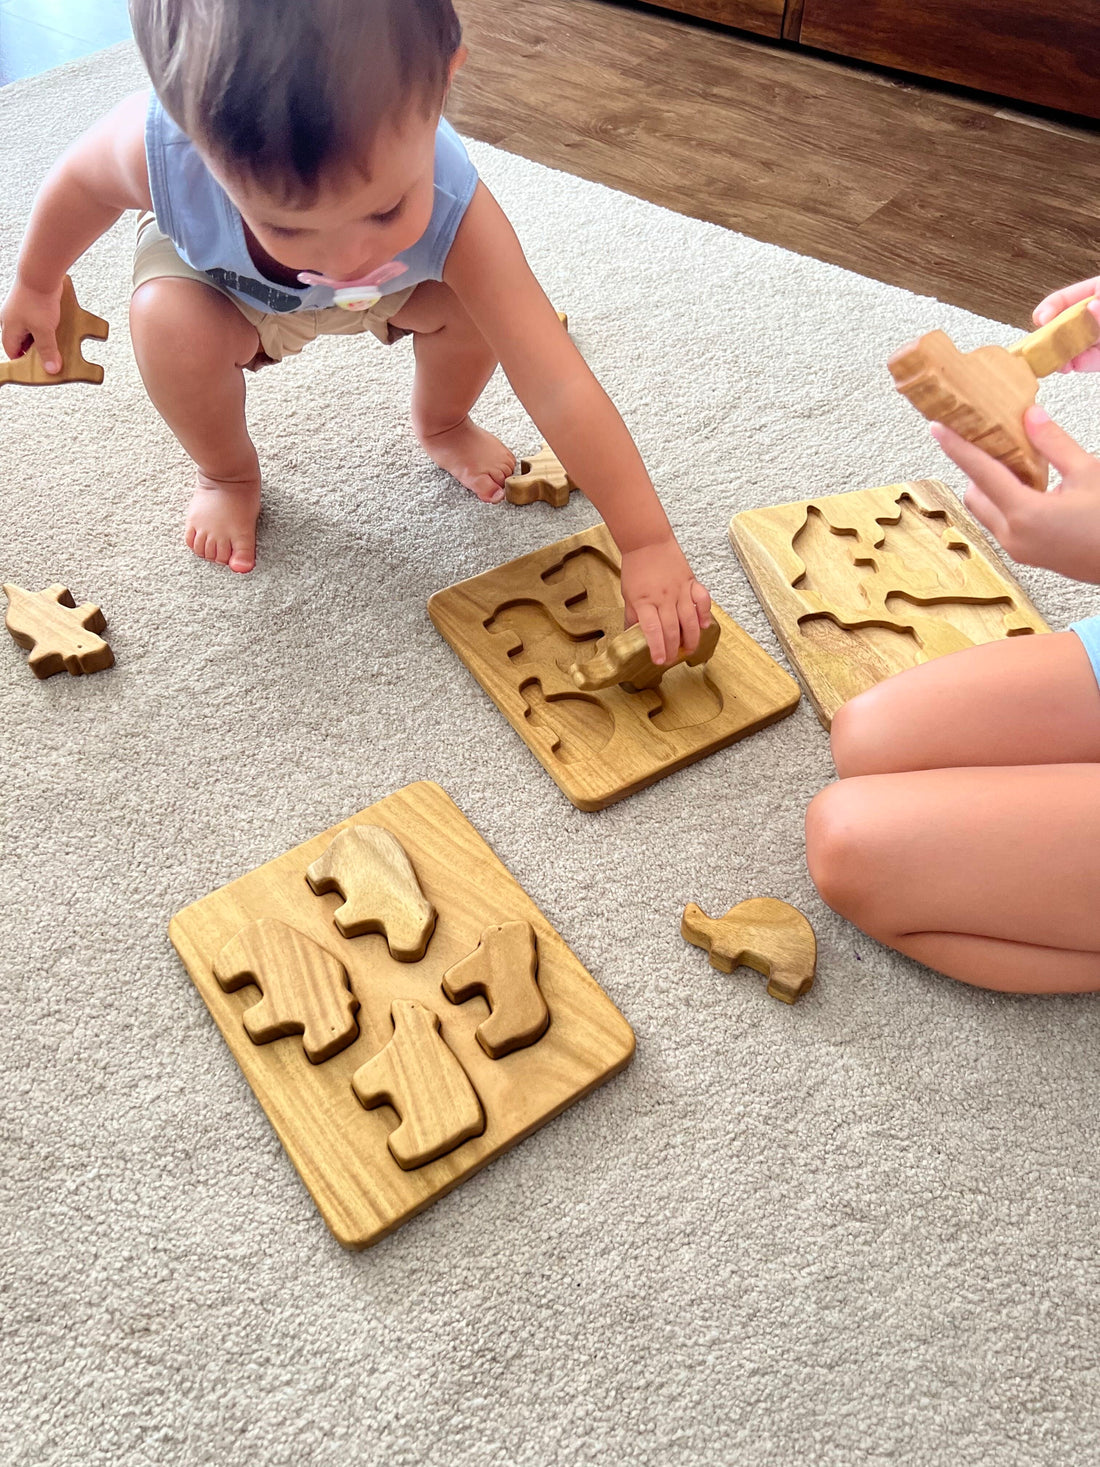 Healthier Play: Why Wooden Toys Are Better For Your Child